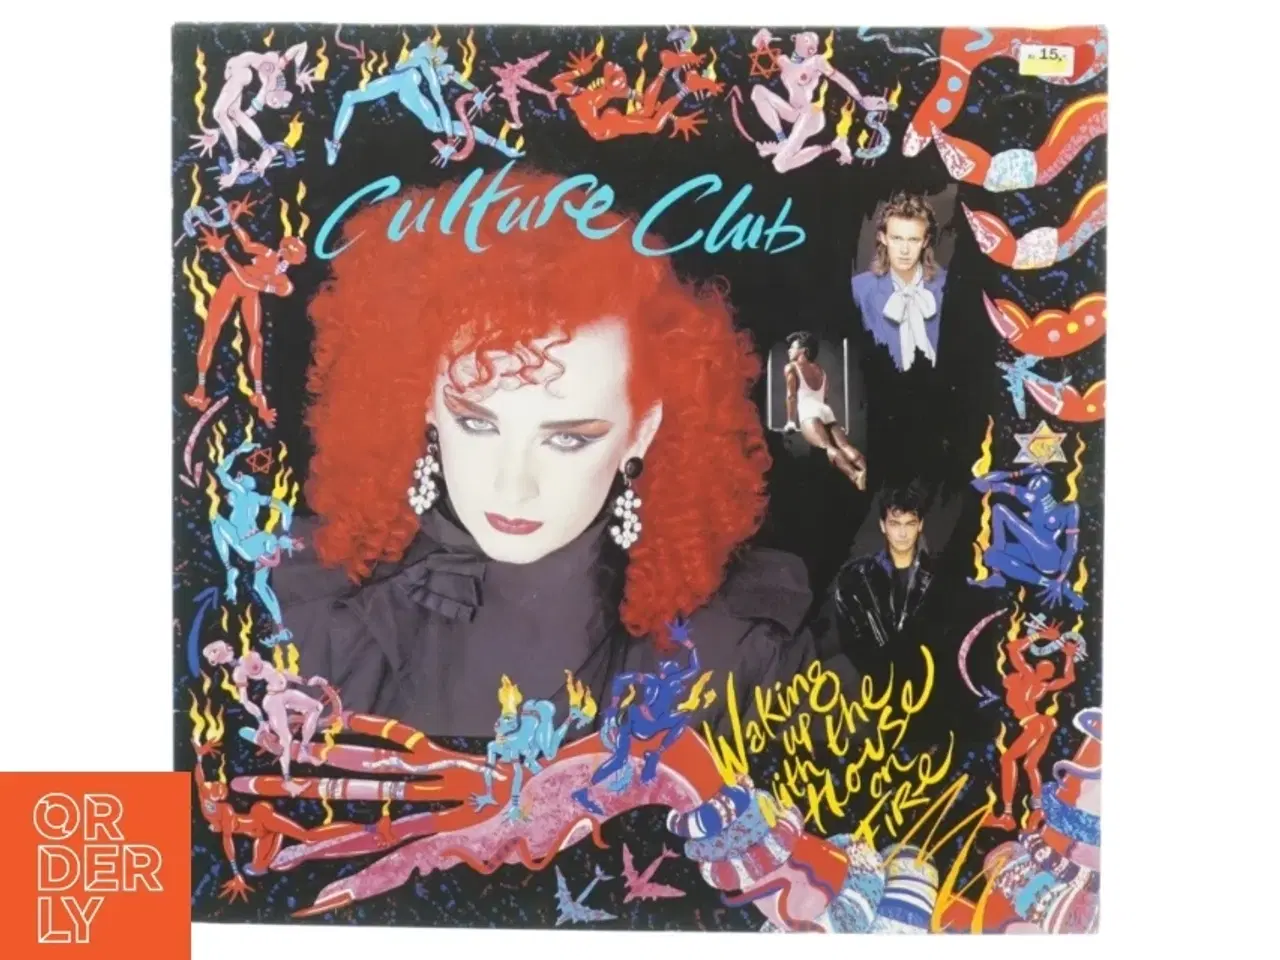 Billede 1 - Culture club: Waking up with the house on fire LP fra Virgin (str. 30 cm)